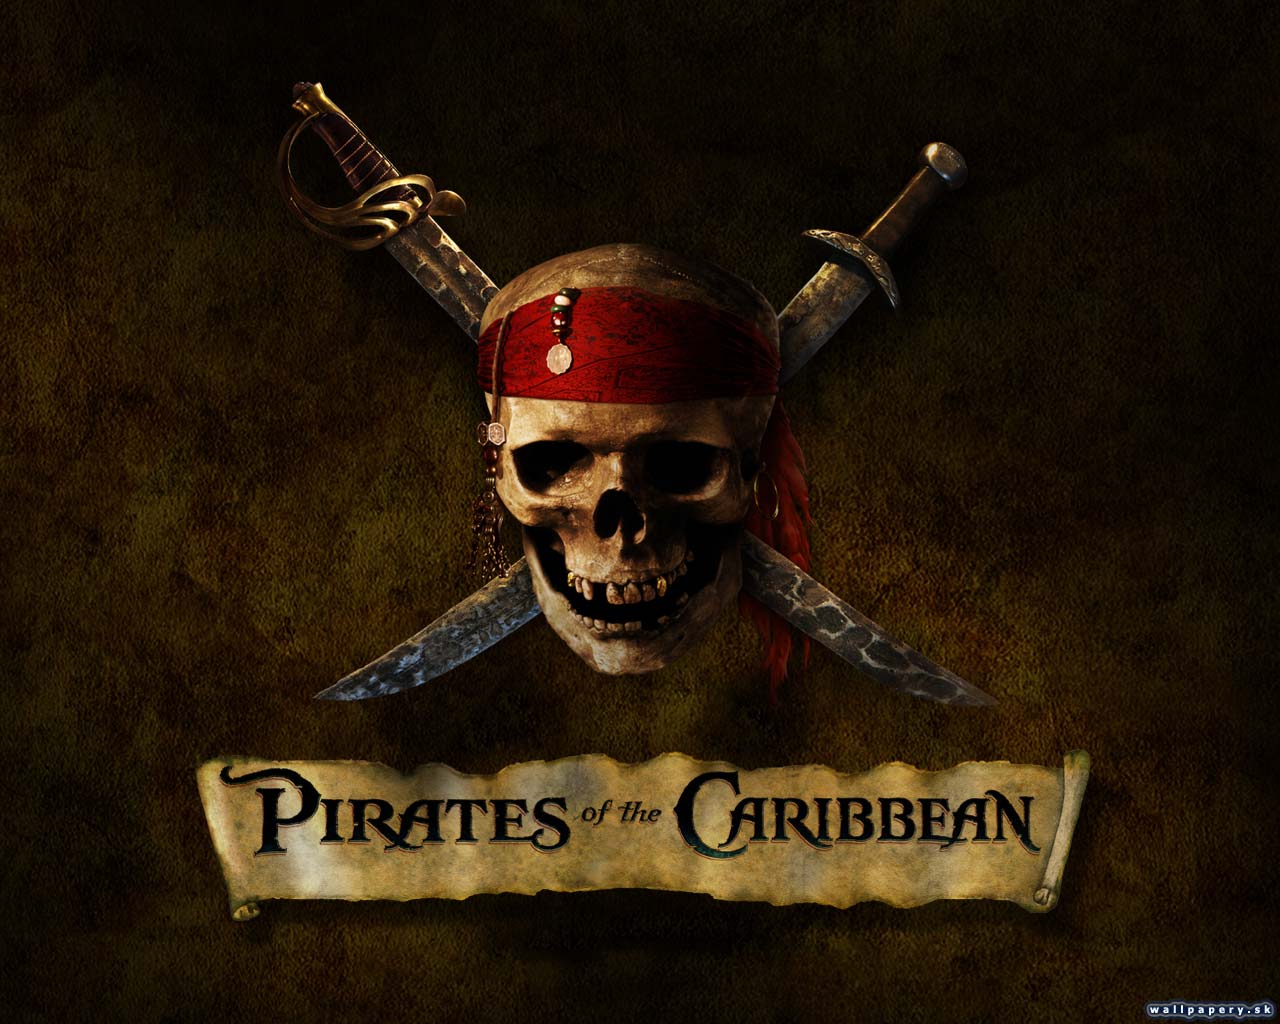 Pirates of the Caribbean - wallpaper 1